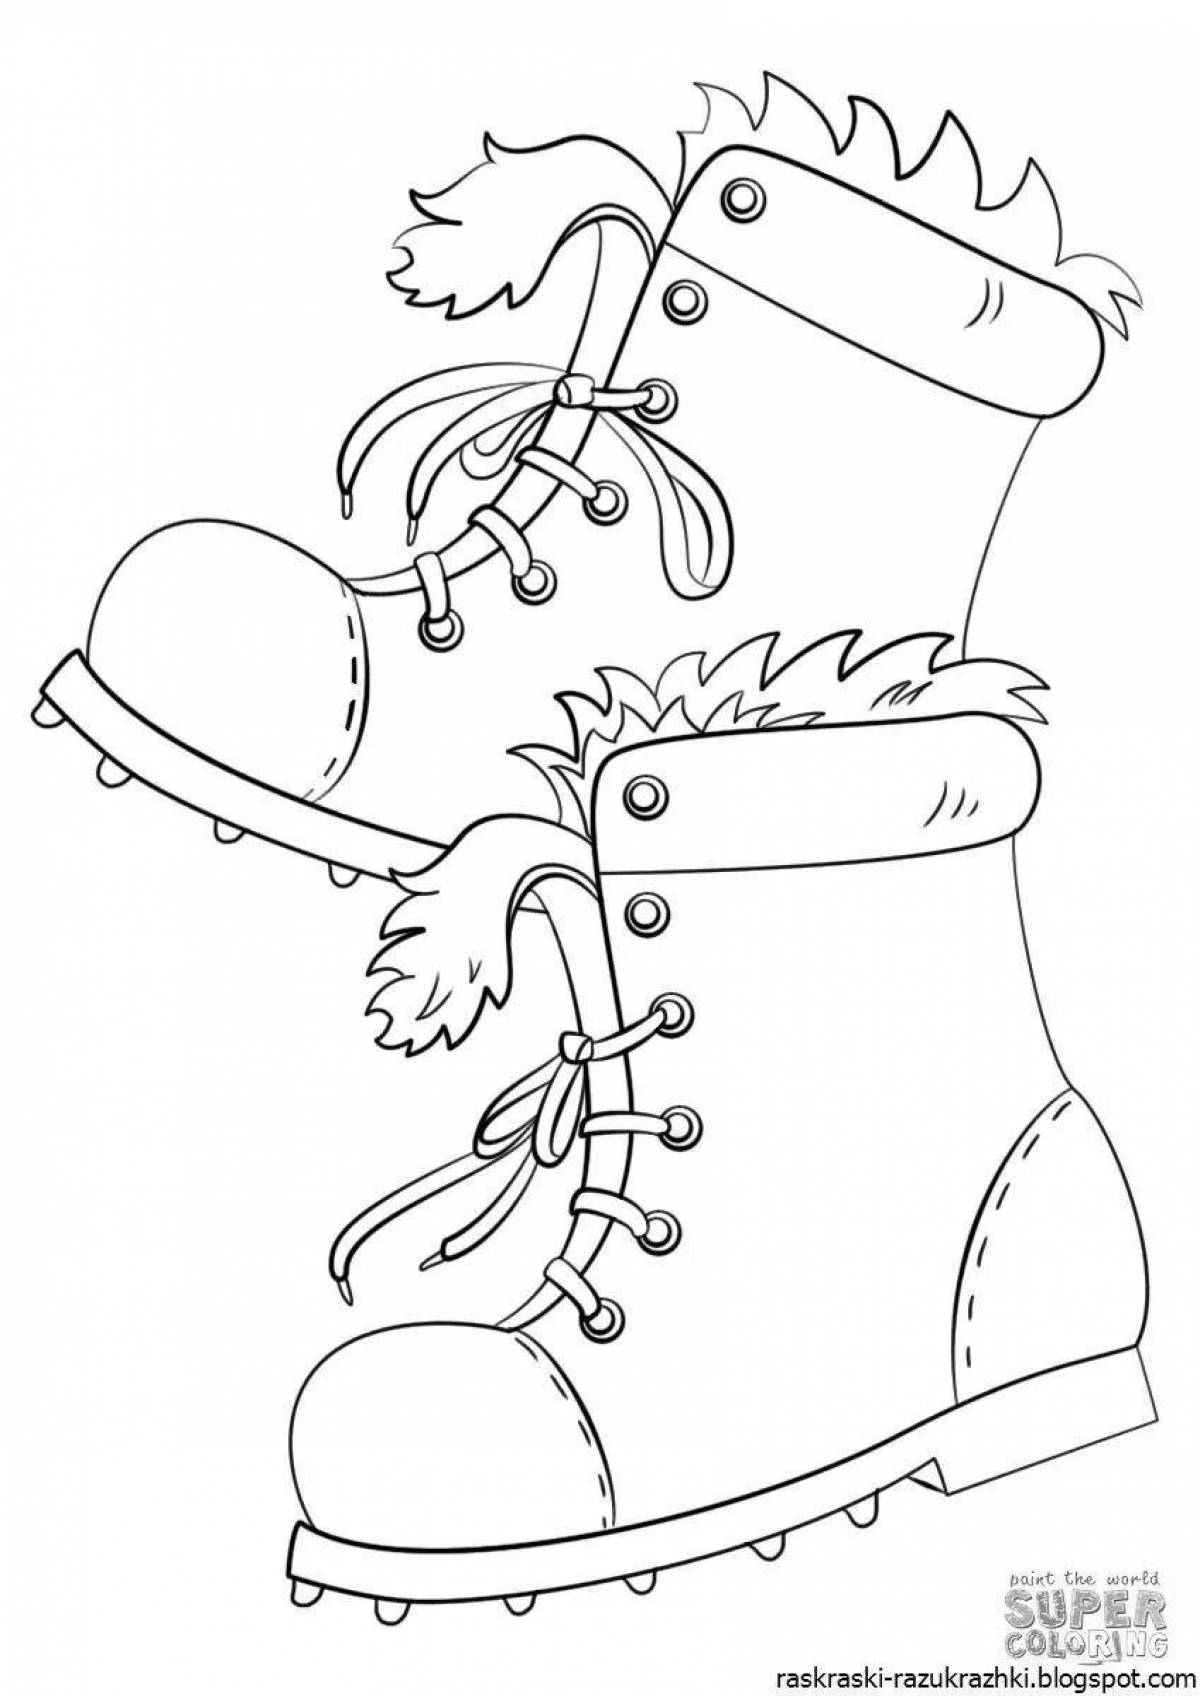 Sparkling winter boots coloring page